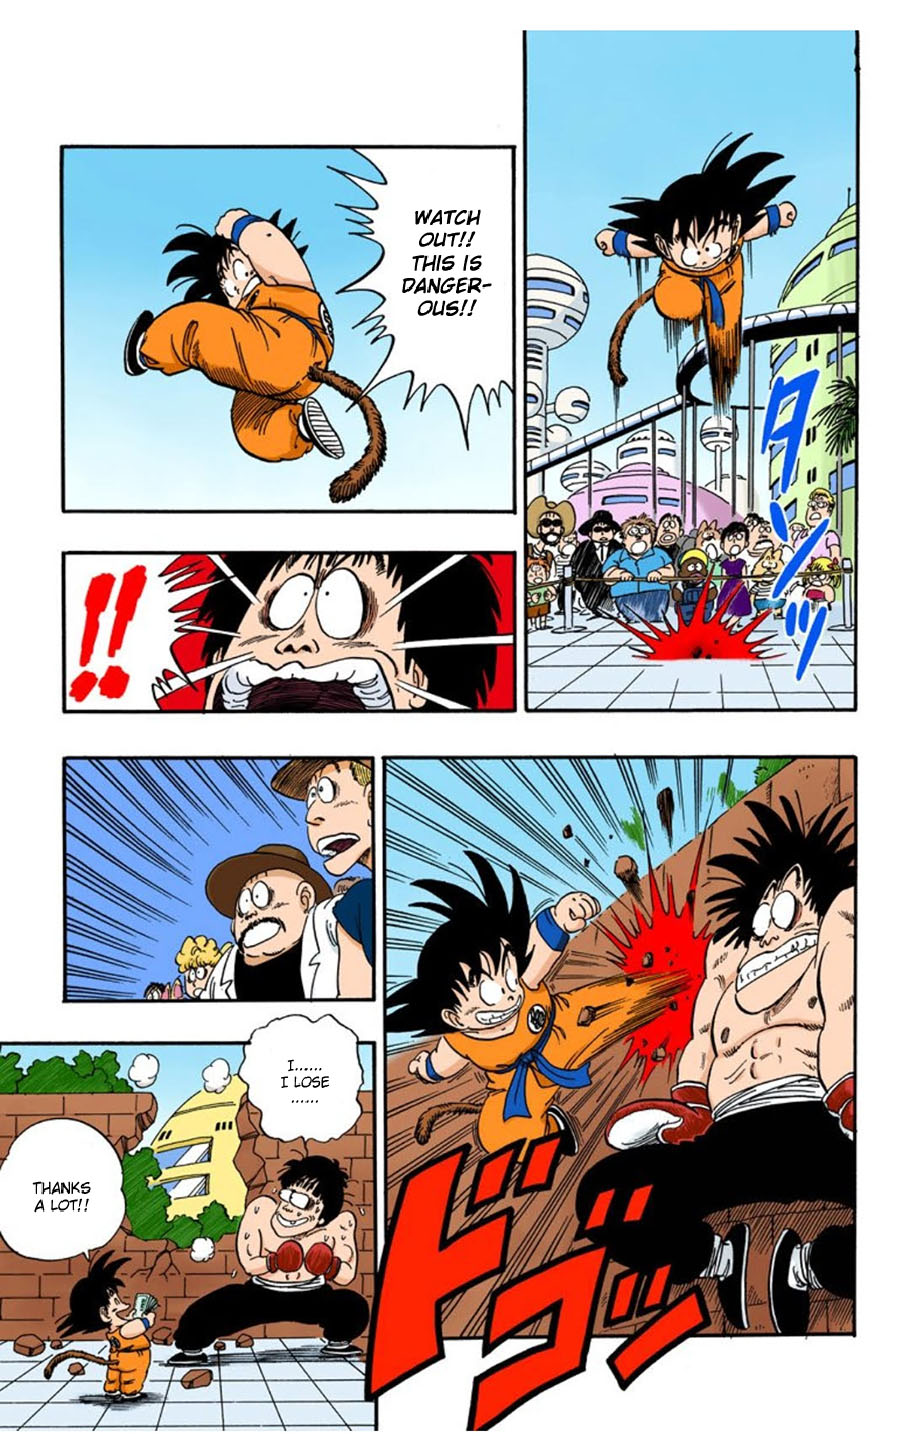 Dragon Ball Full Color Edition Vol. 6 Ch. 68 Bulma's House in West City